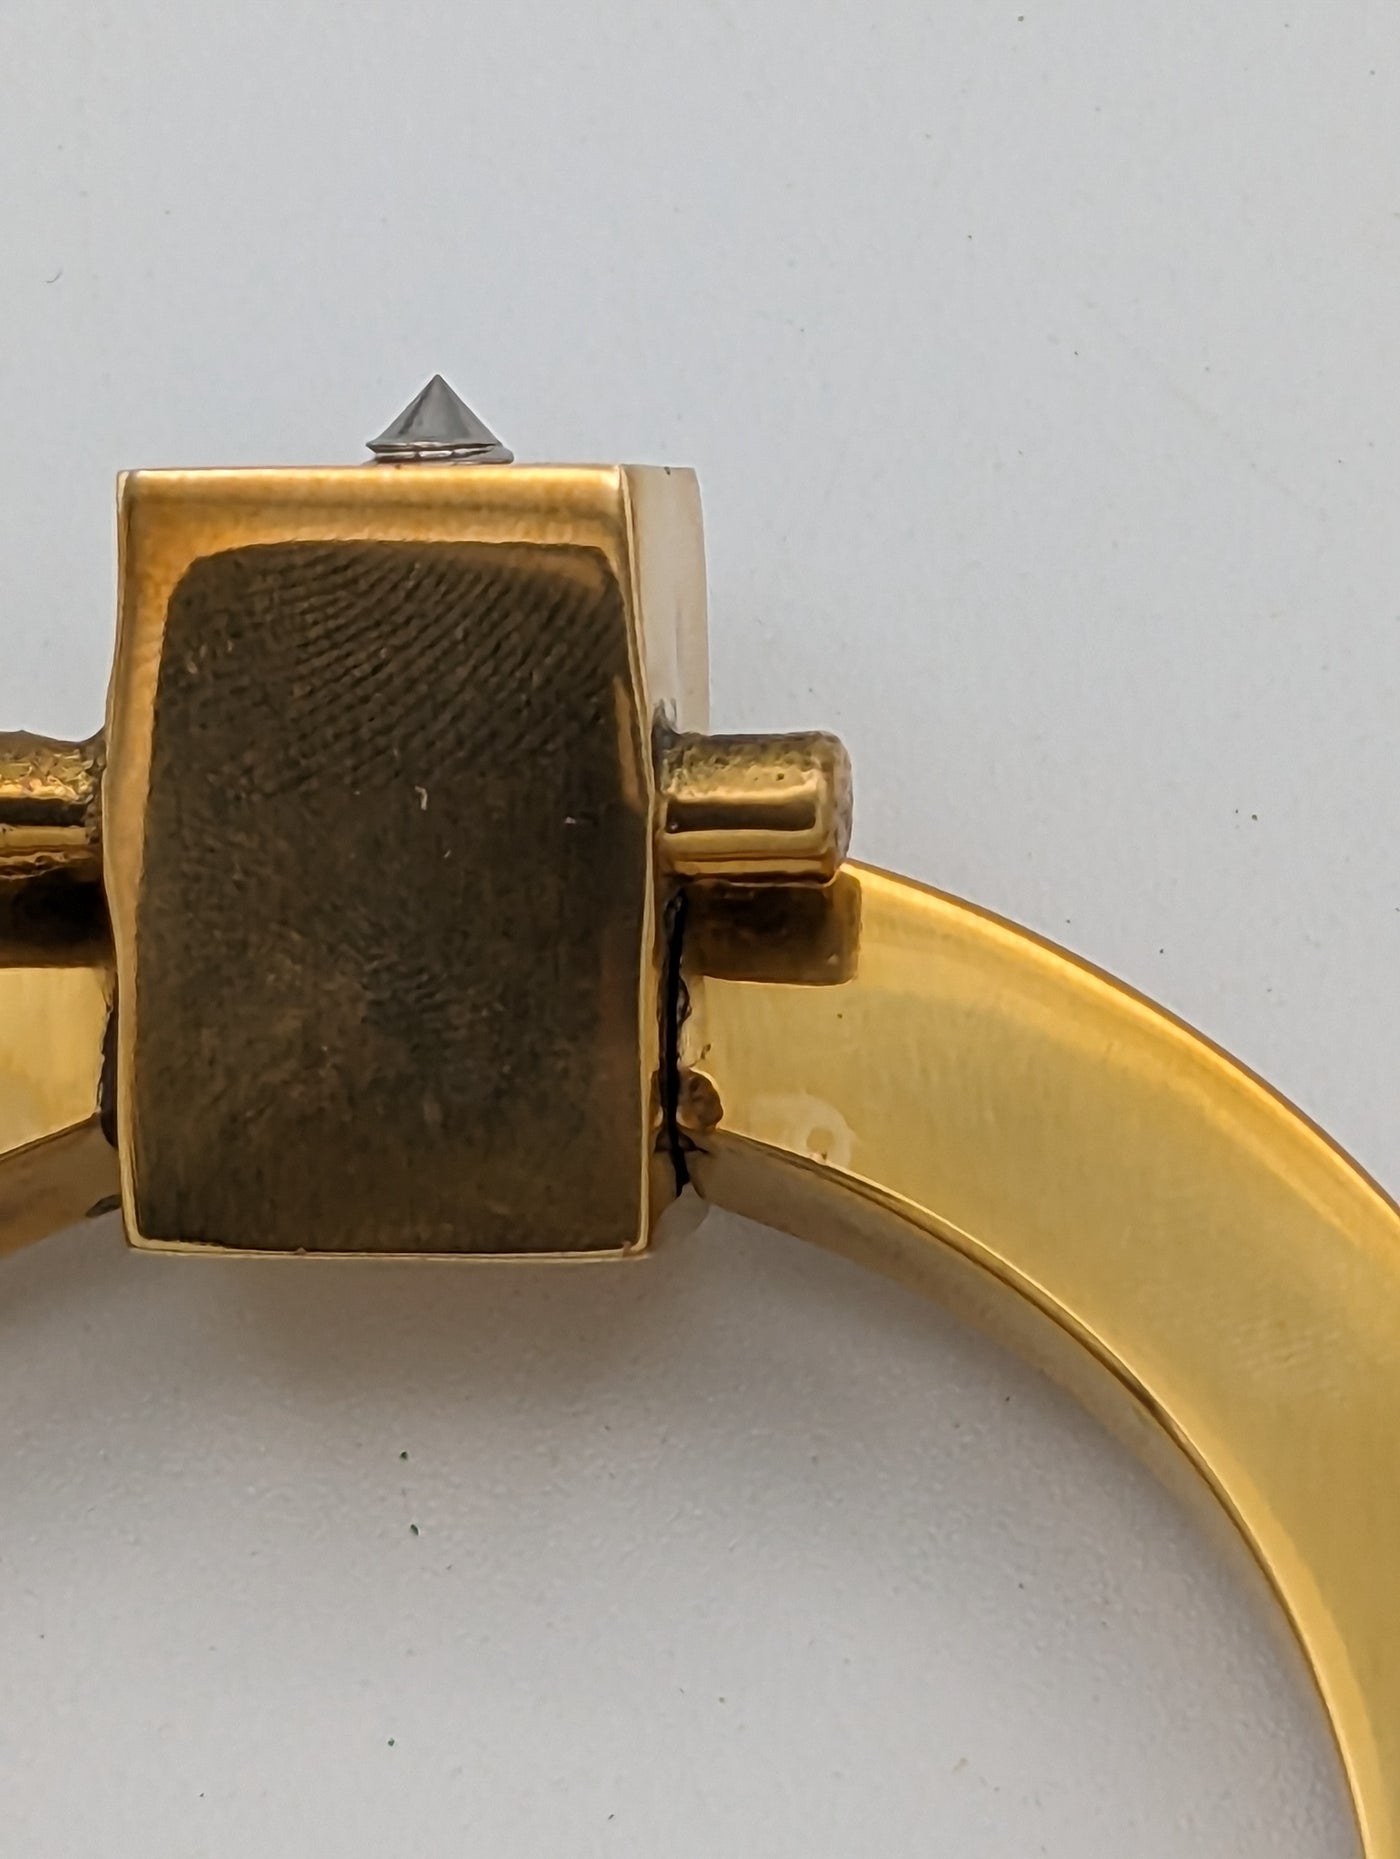 Open Box Sale Item 3 Inch Mission Style Solid Brass Drawer Ring Pull (Polished Brass Finish)